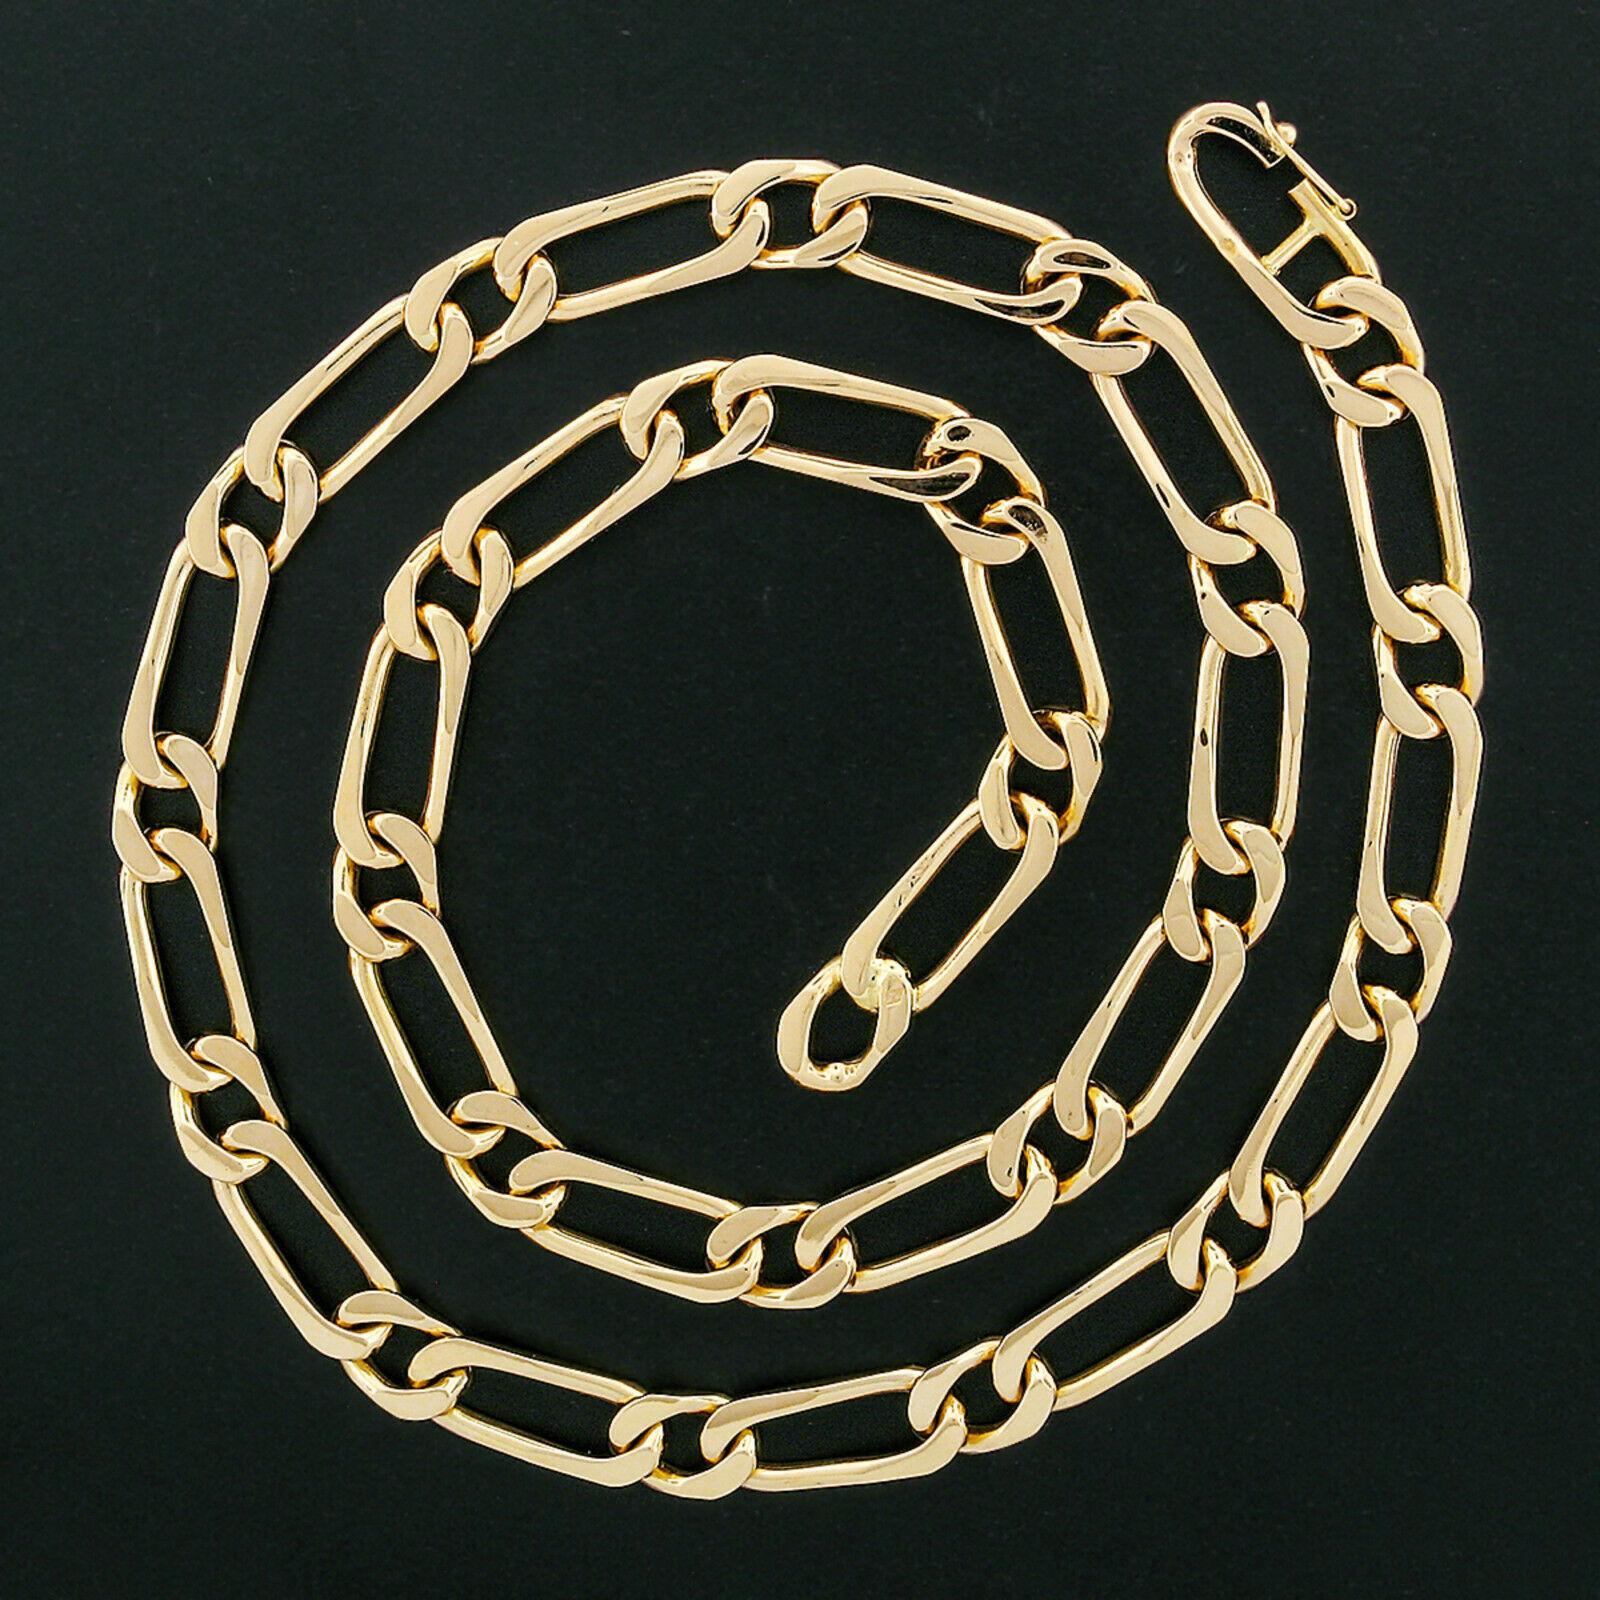 This very well made chain necklace was crafted in France from solid 14k rosy yellow gold. The 23 inch long necklace features fine and solid unique link design that easily stands out and makes a bold statement when the chain is worn around the neck.